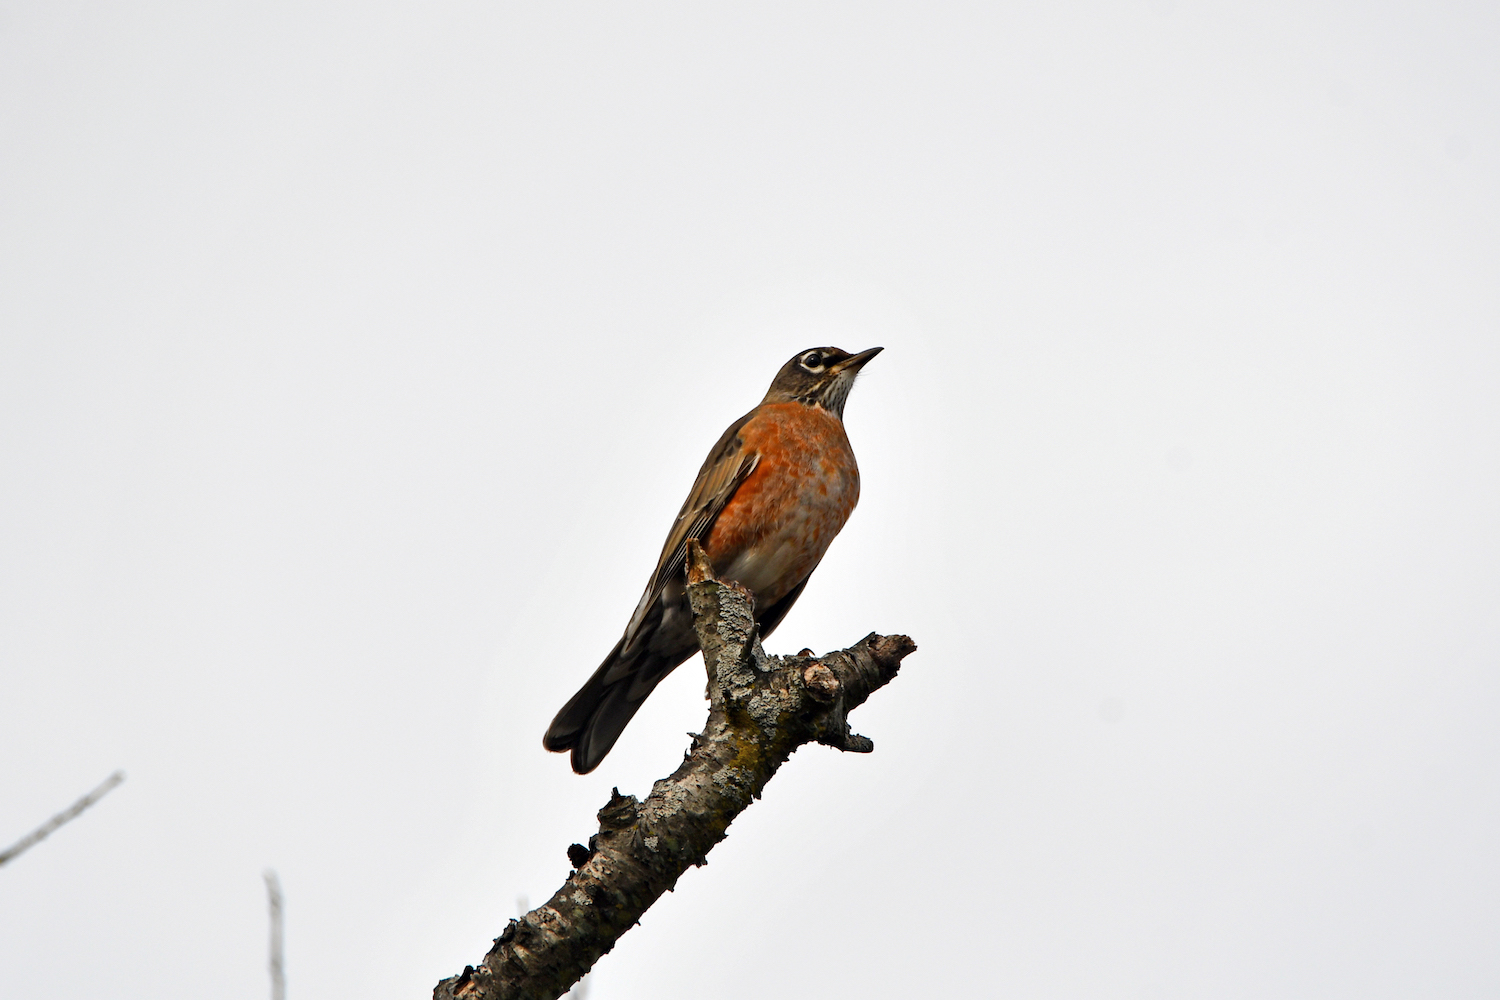 A robin perched on a branch.